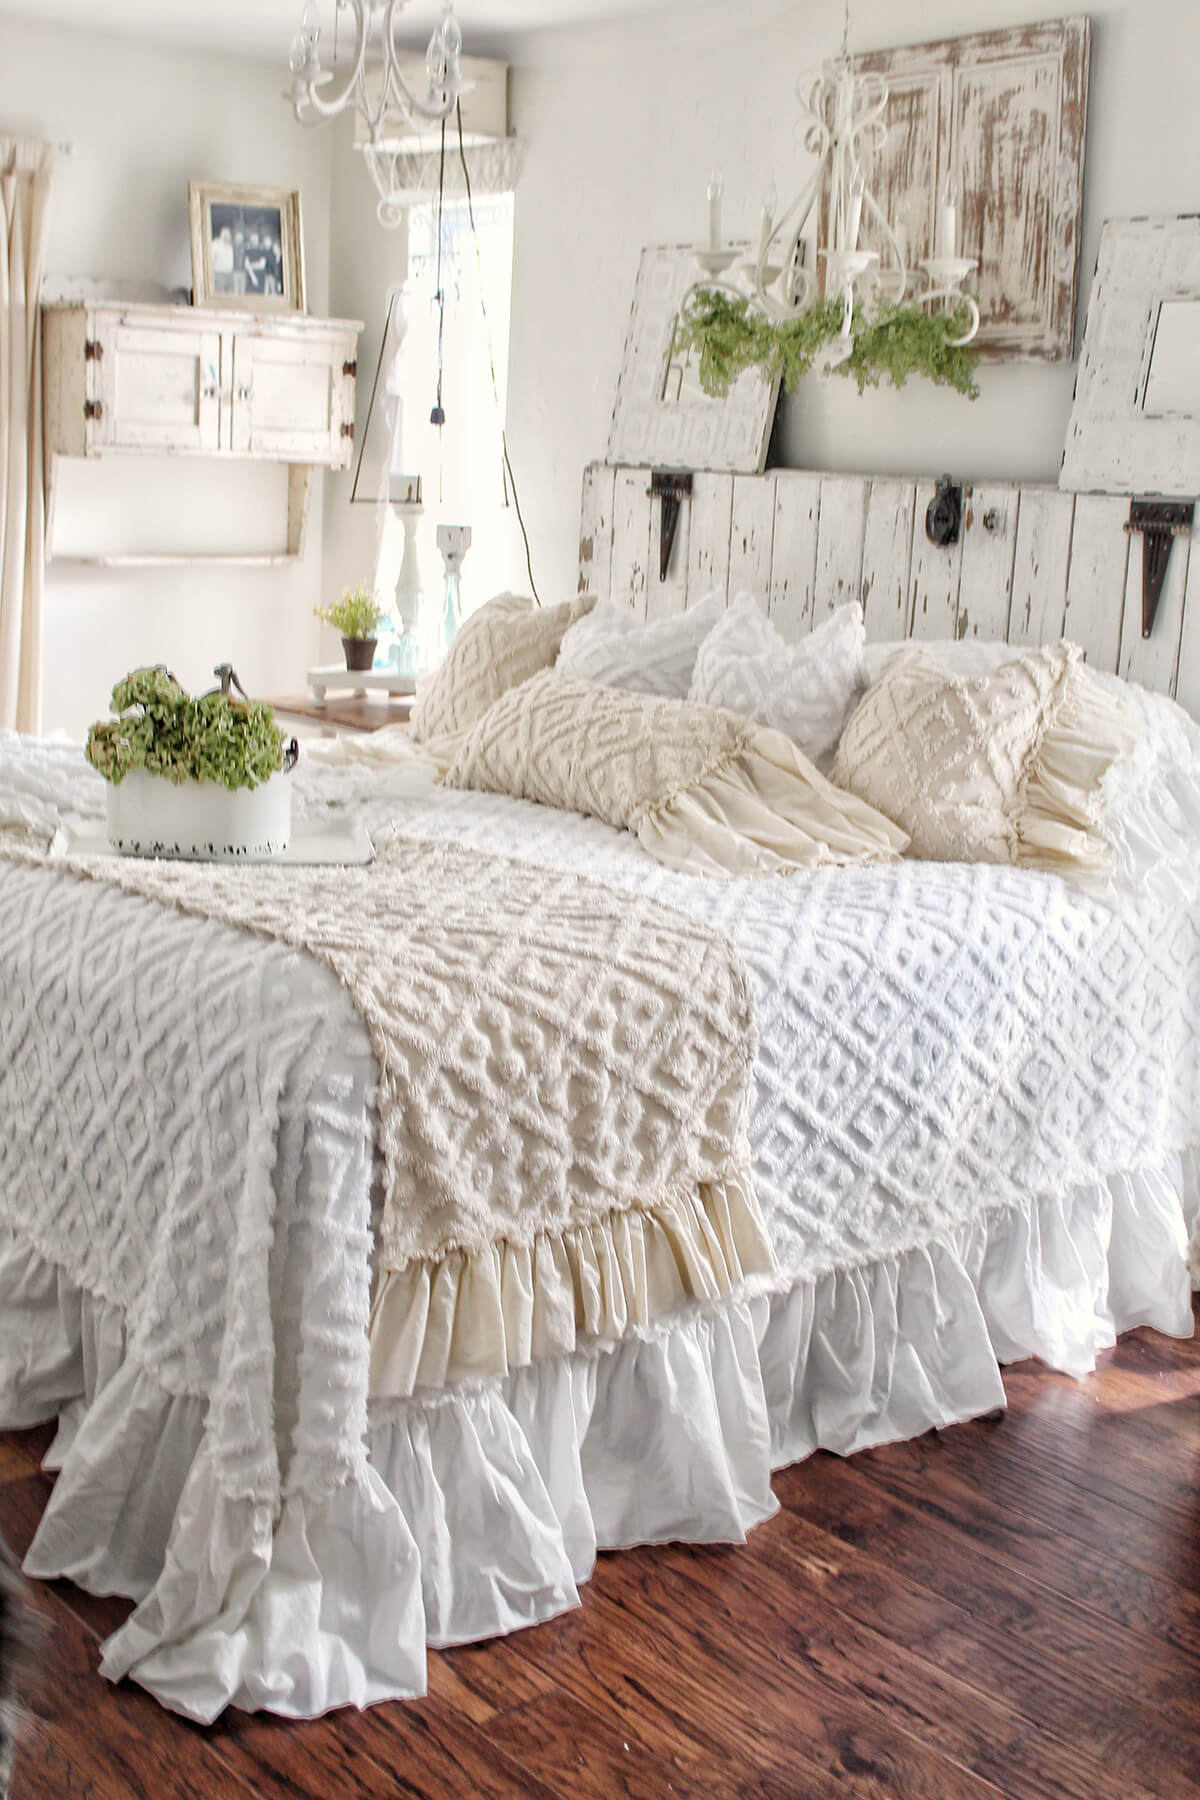 White Distressed Wood and Snuggly Chennile Linens